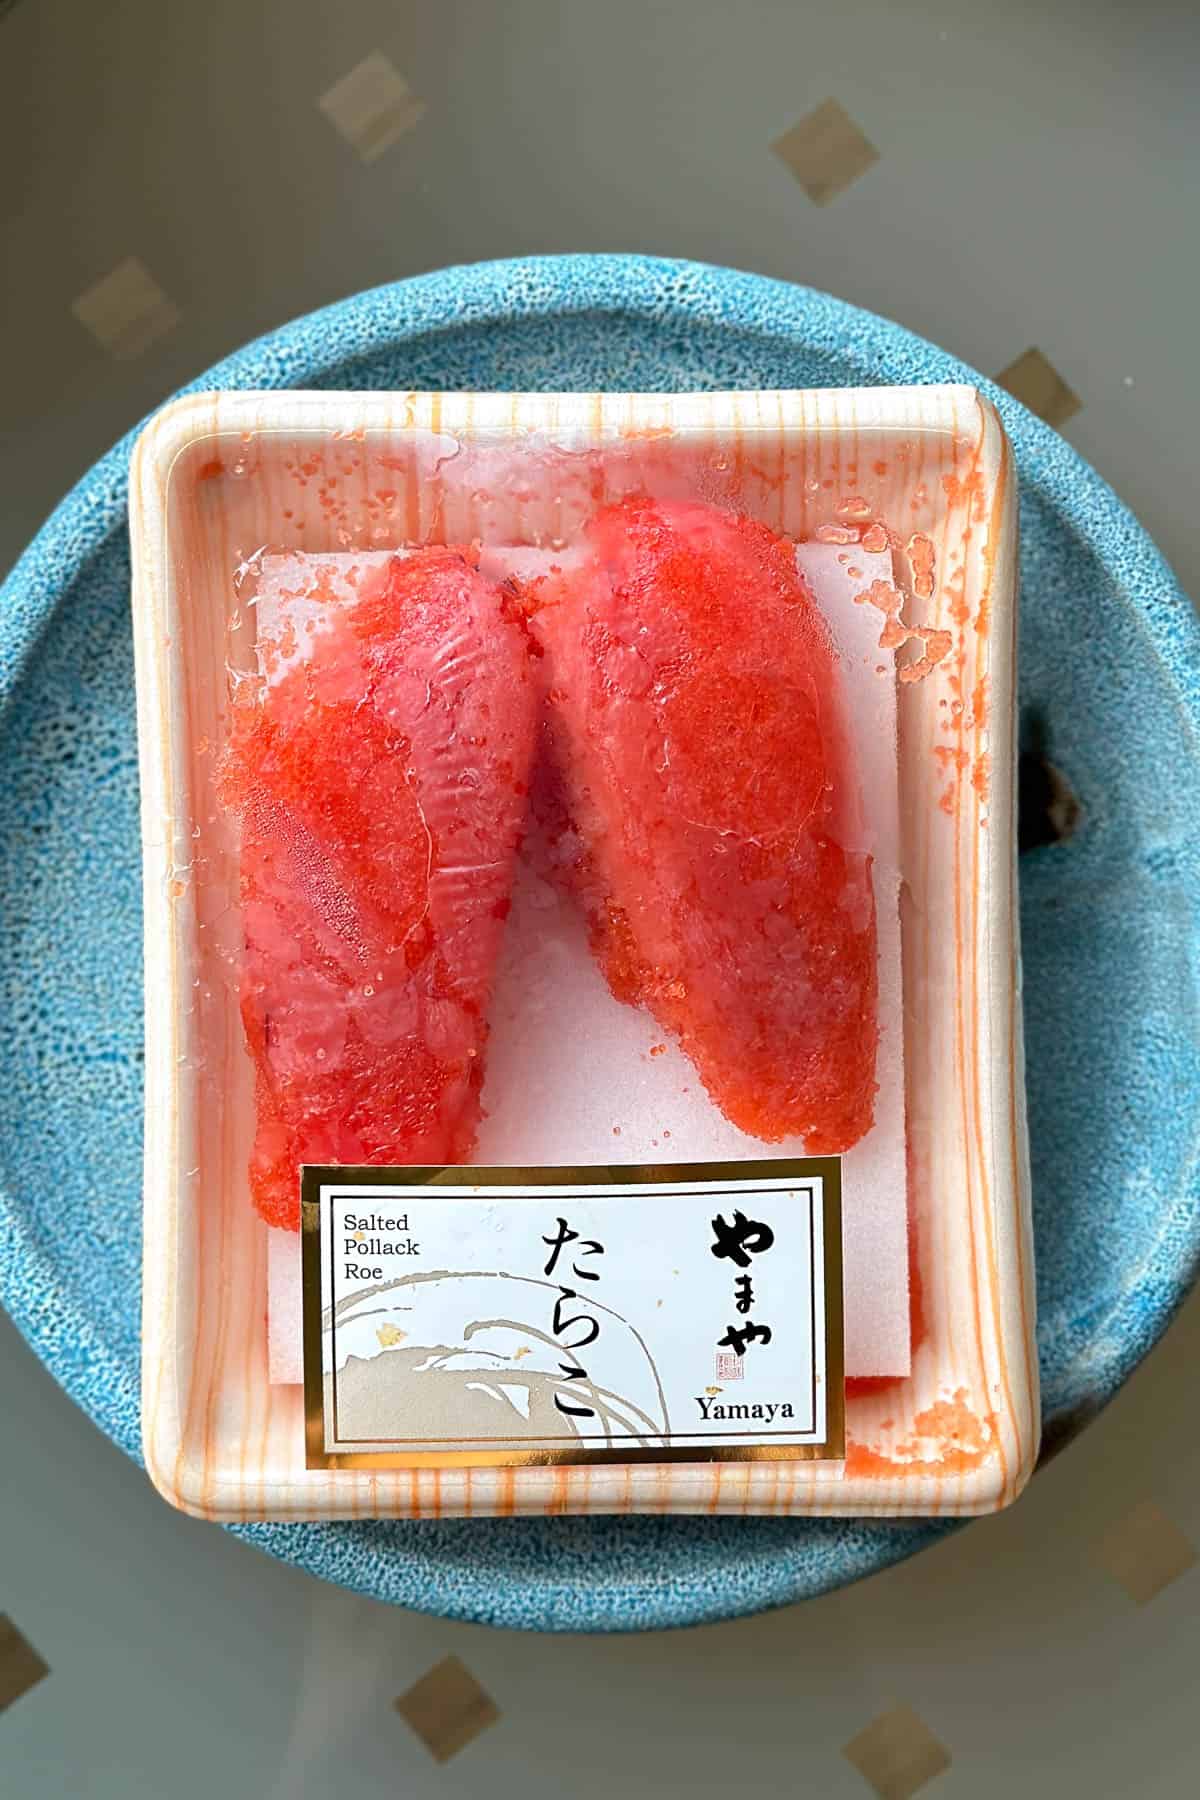 A package of mentaiko (2 sacks).